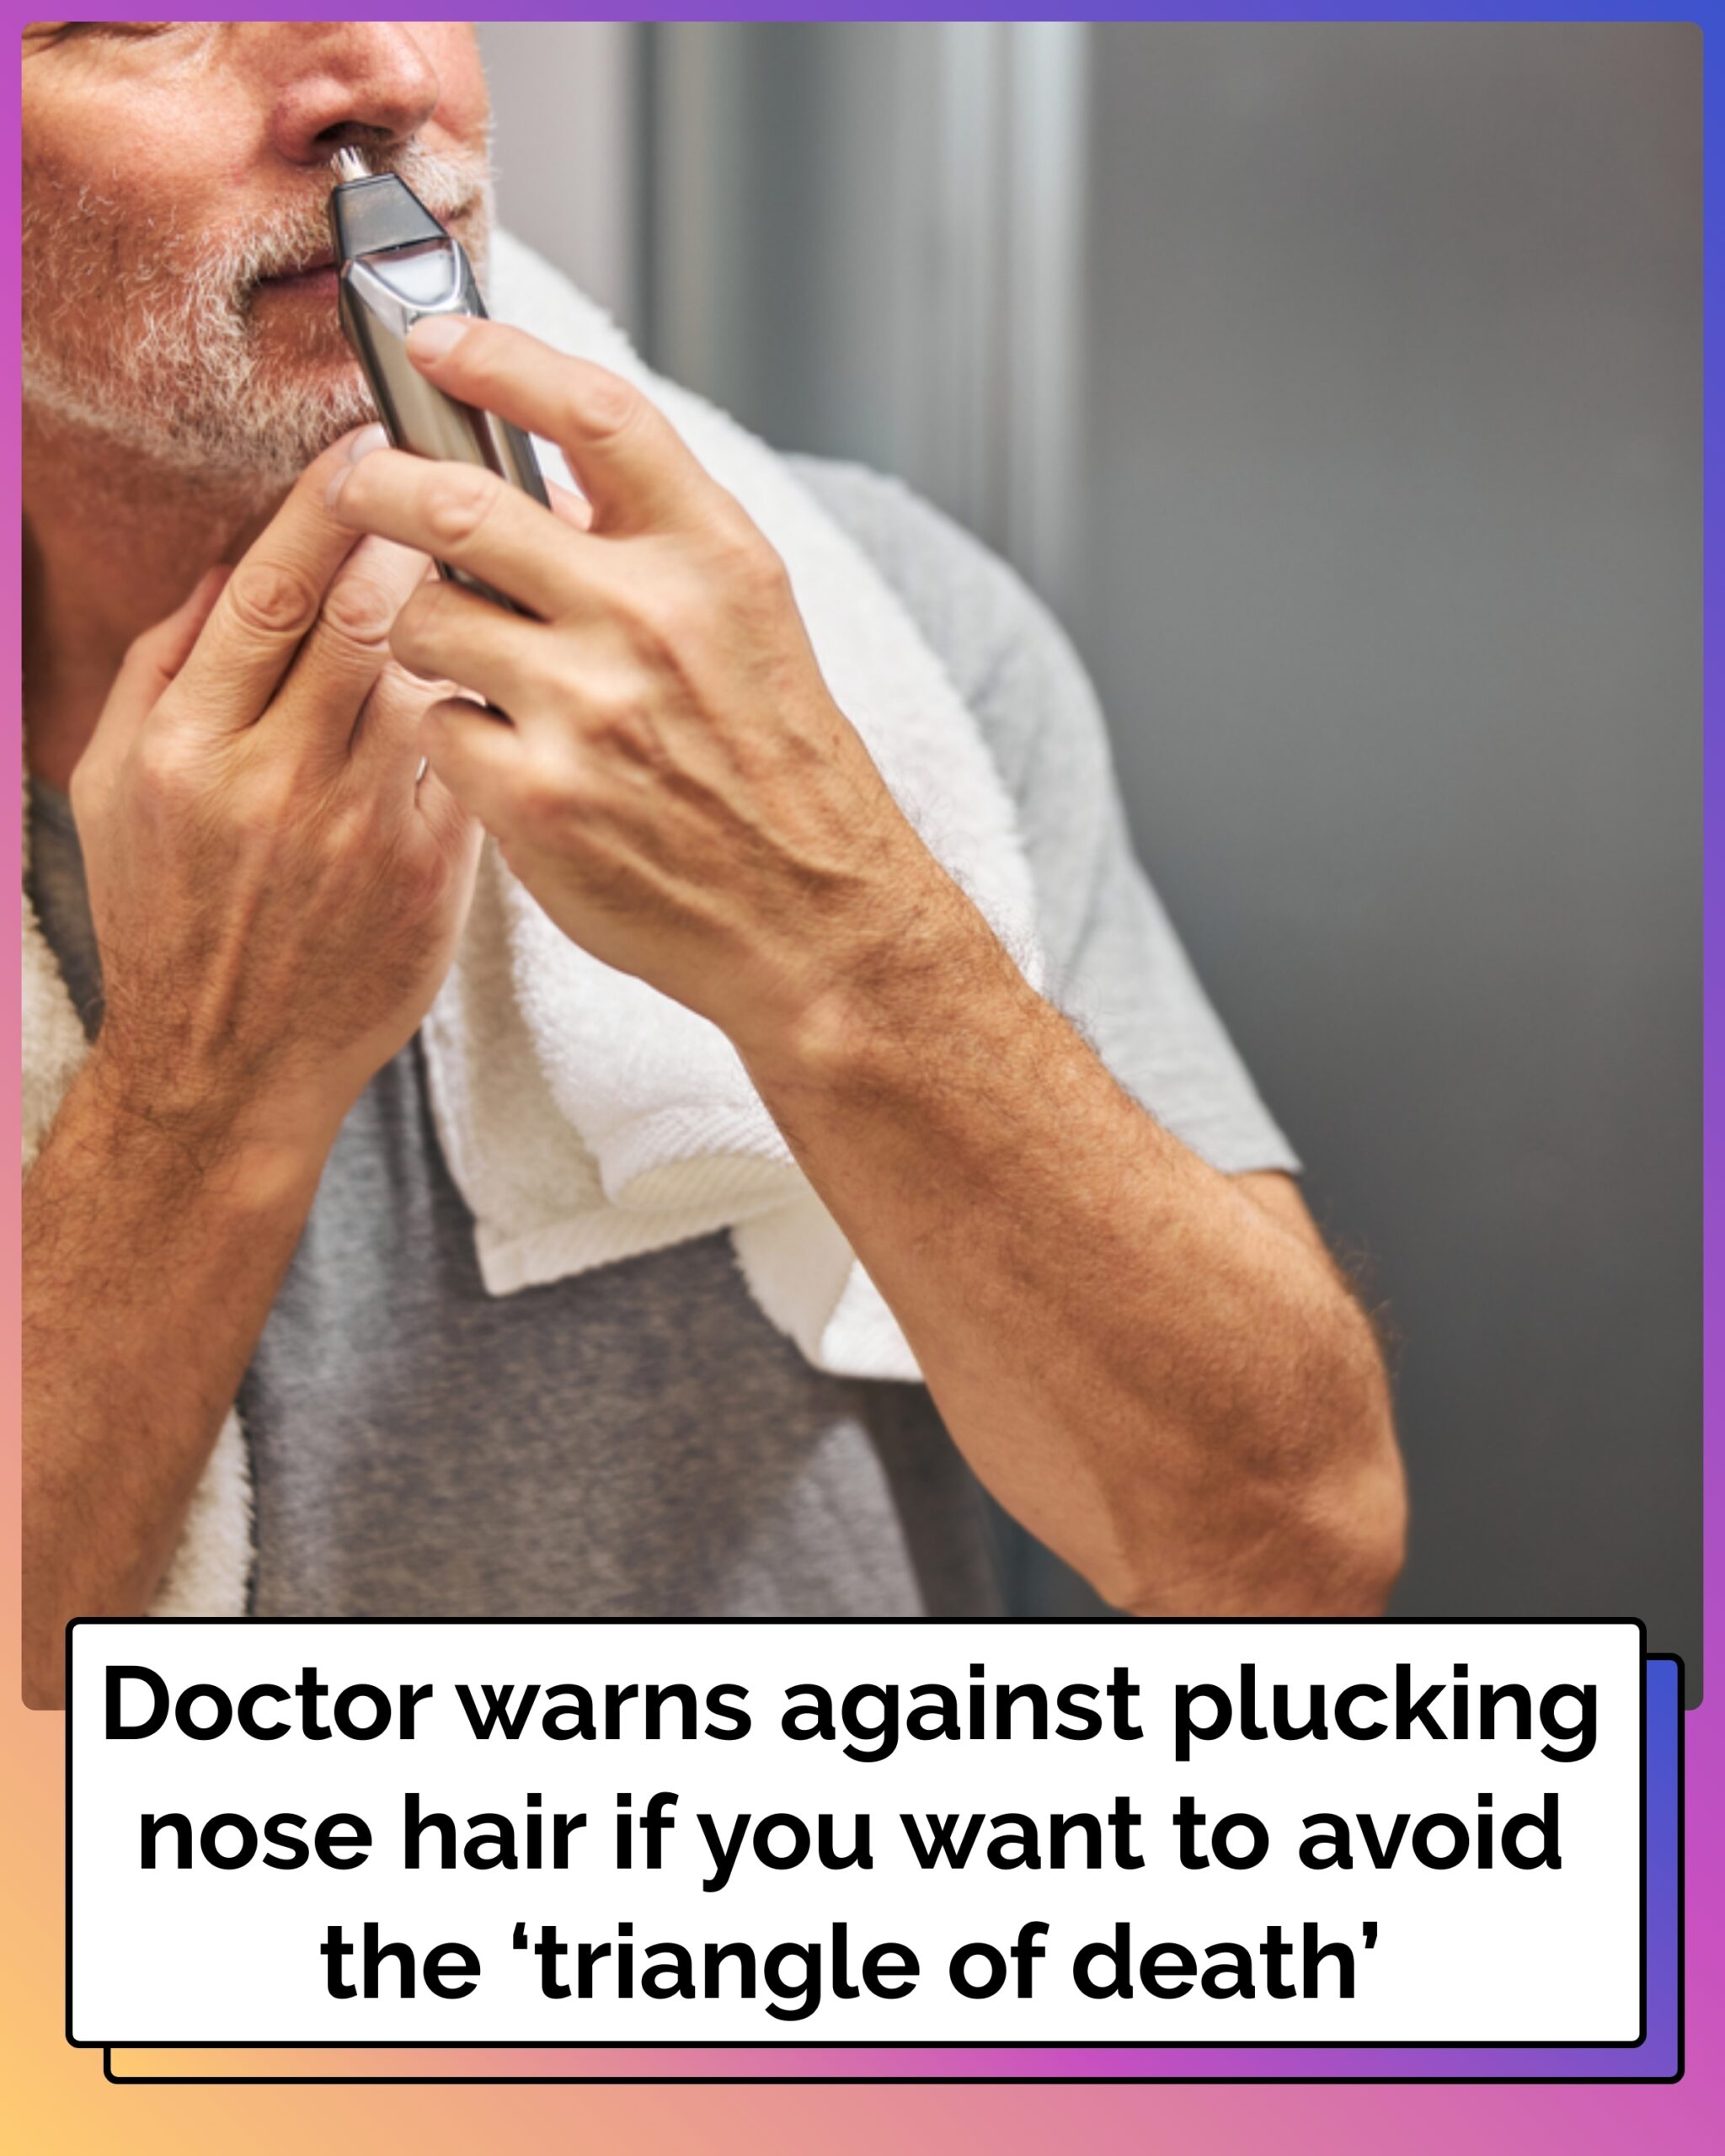 Doctor warns against plucking nose hair if you want to avoid the ‘triangle of death’